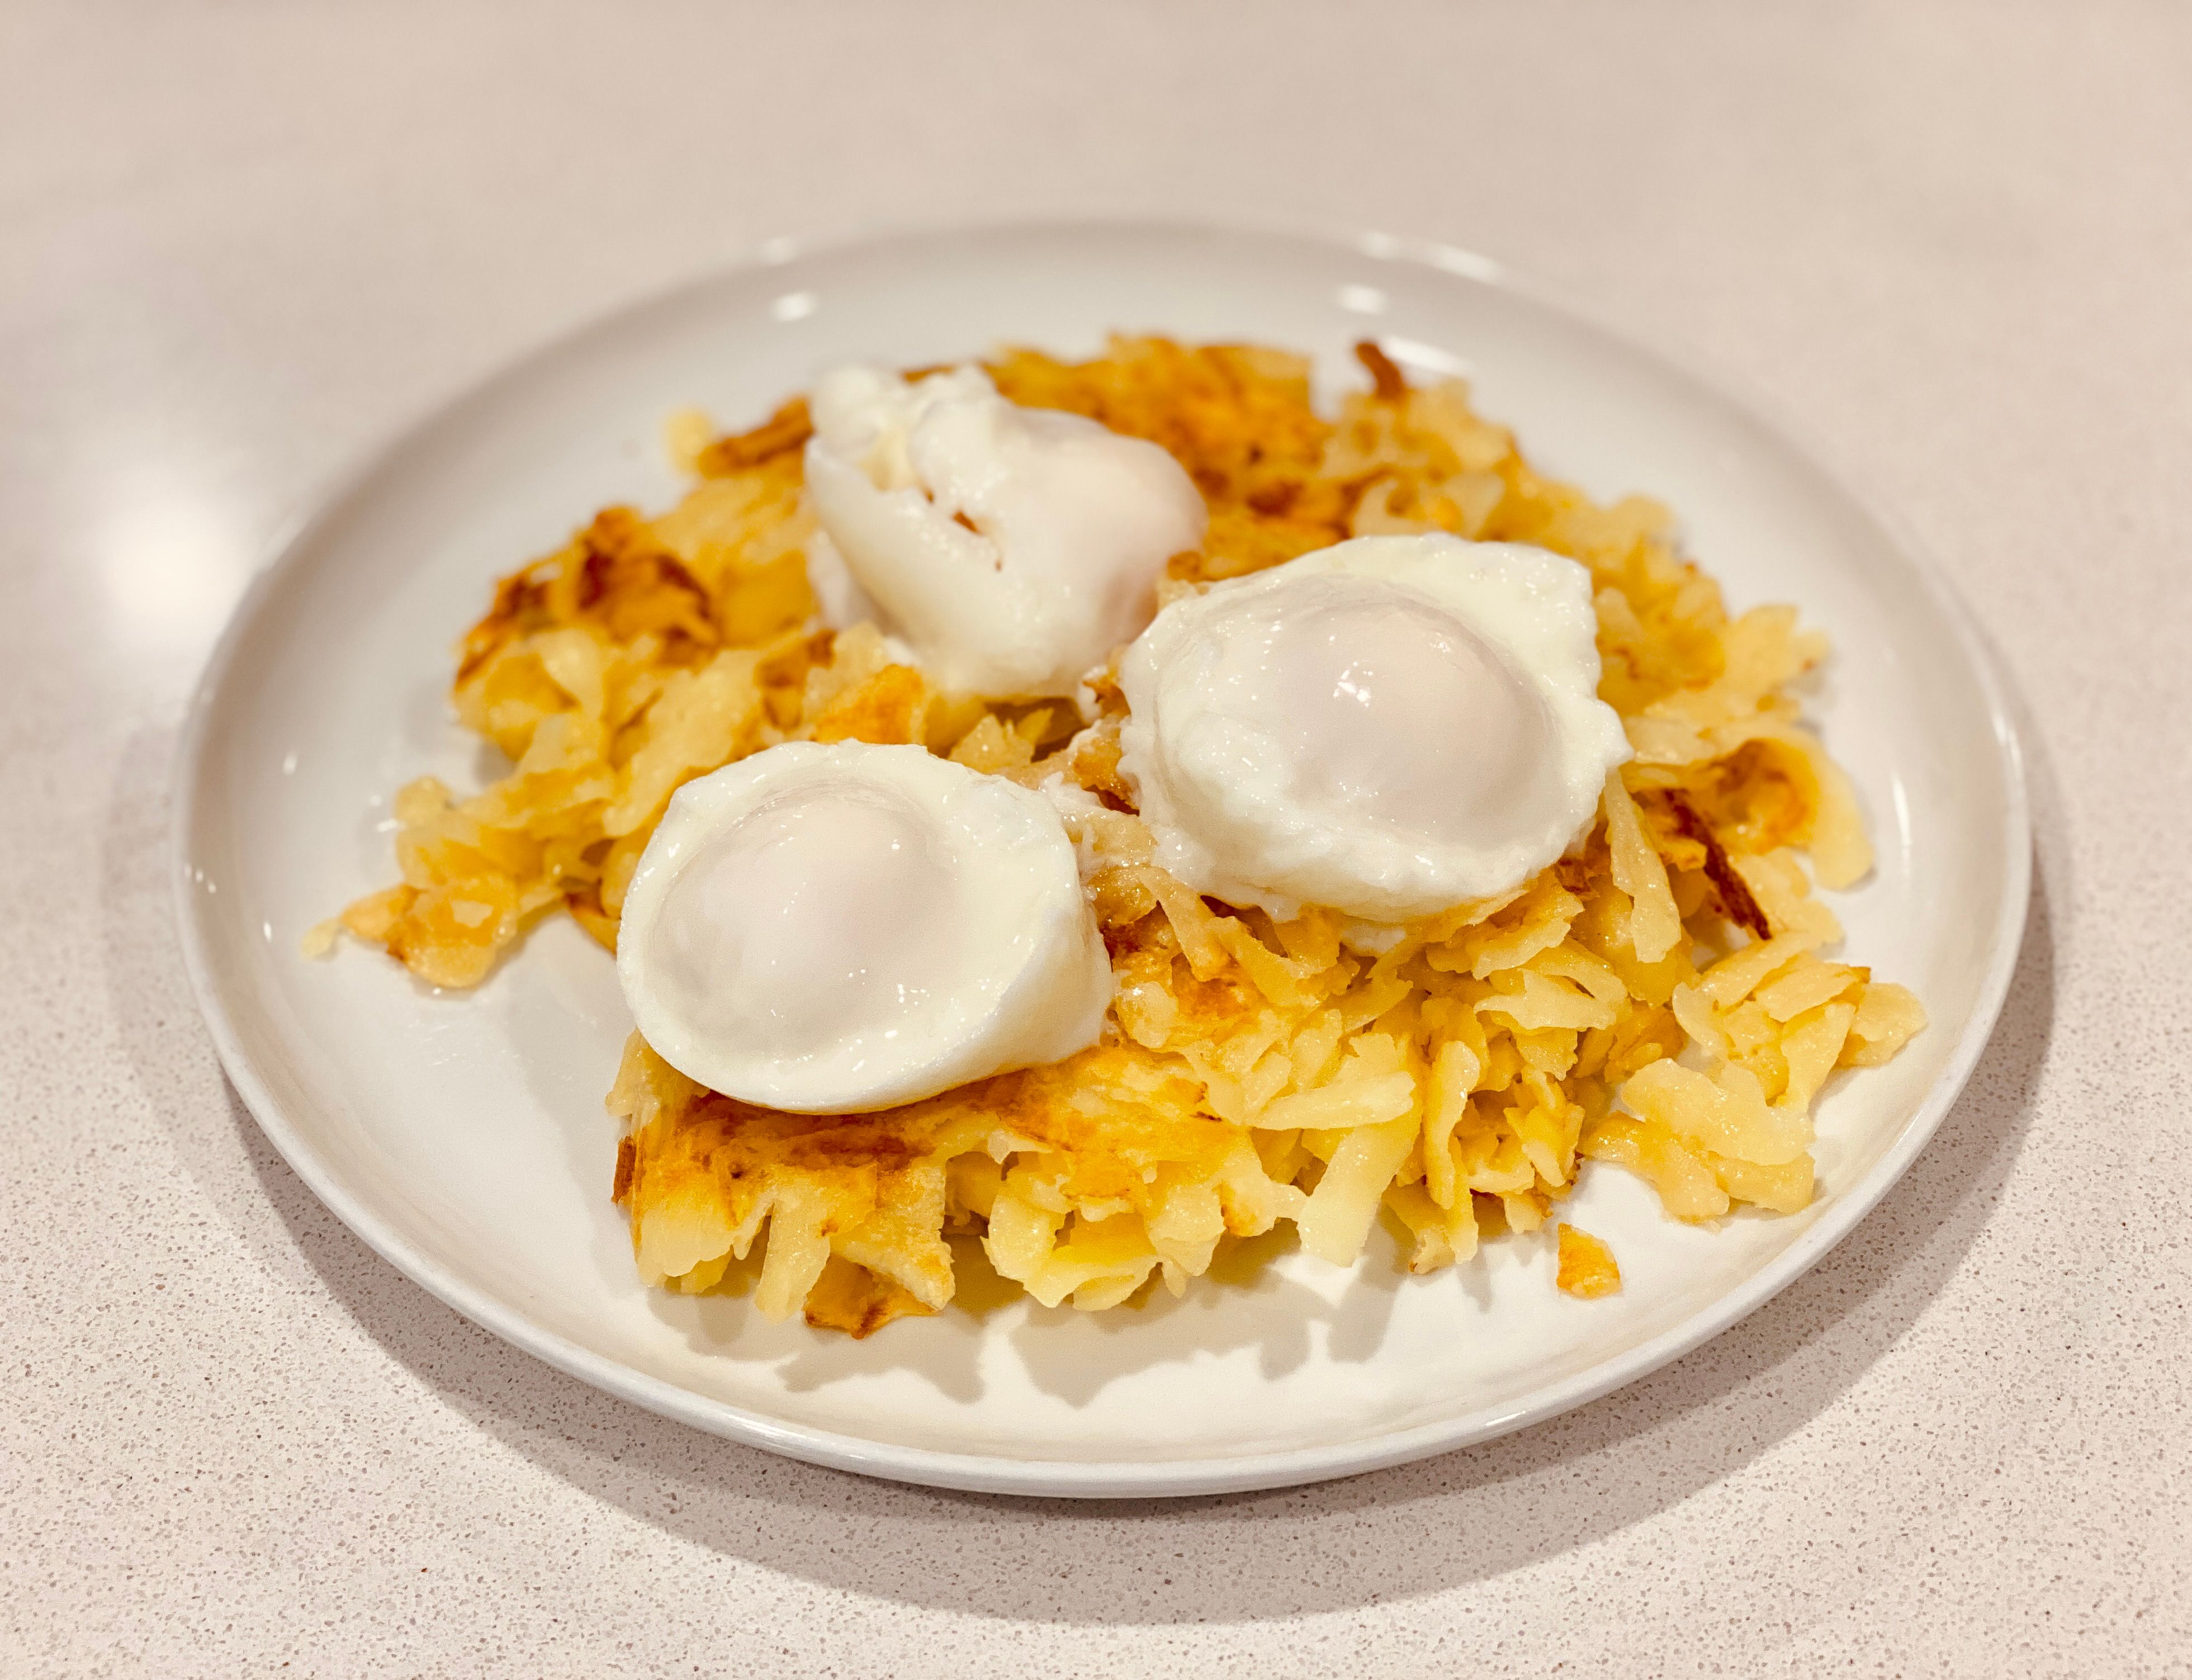 A photo of a plate with a fallen-apart rösti on it, with three poached eggs sitting on top.